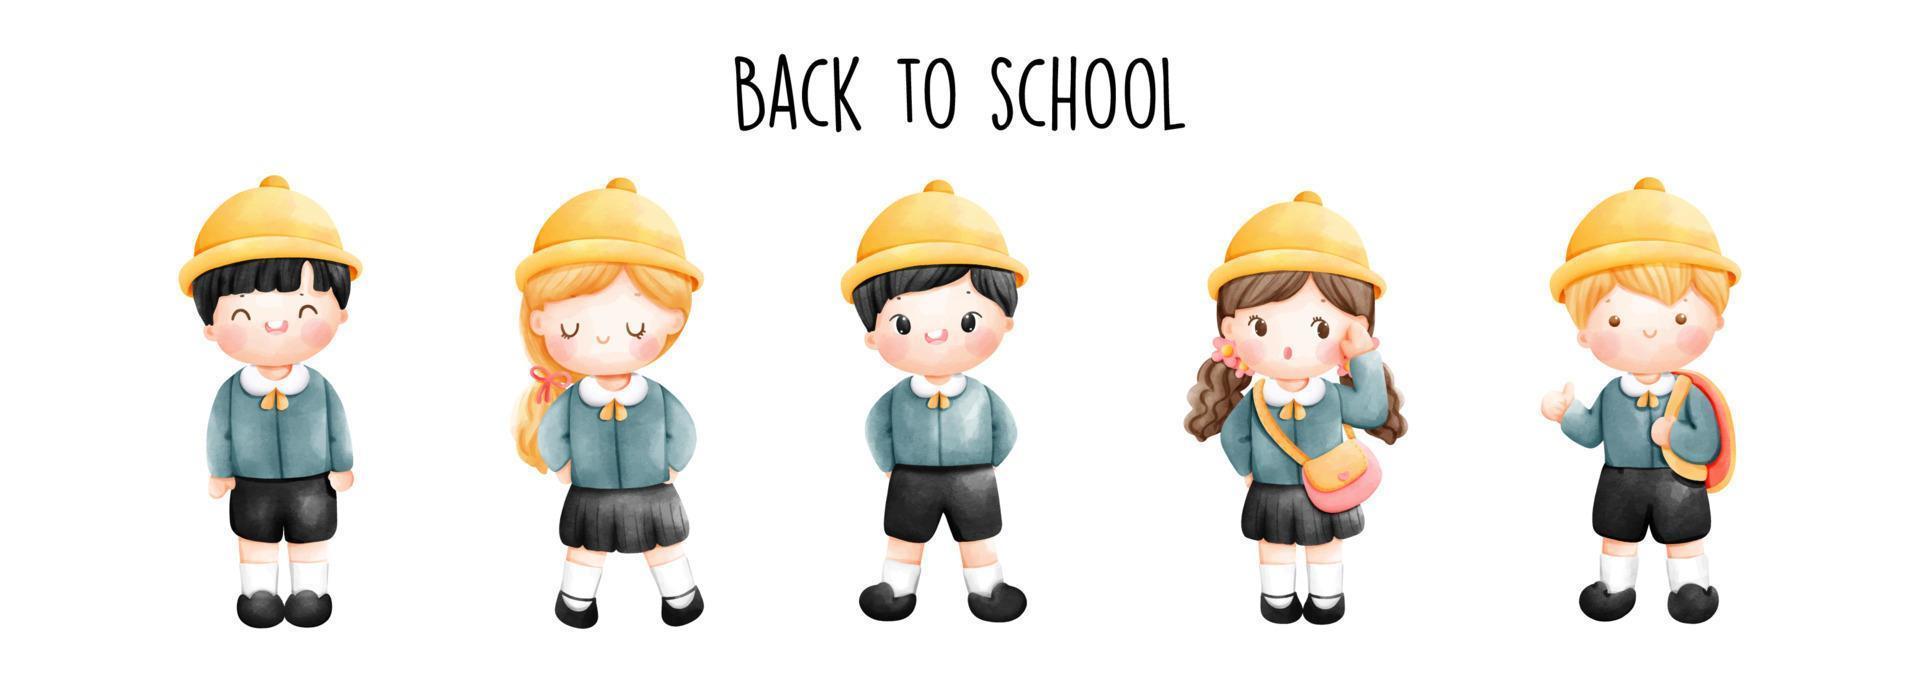 Back to school with boy and girl in school uniform. Vector illustration